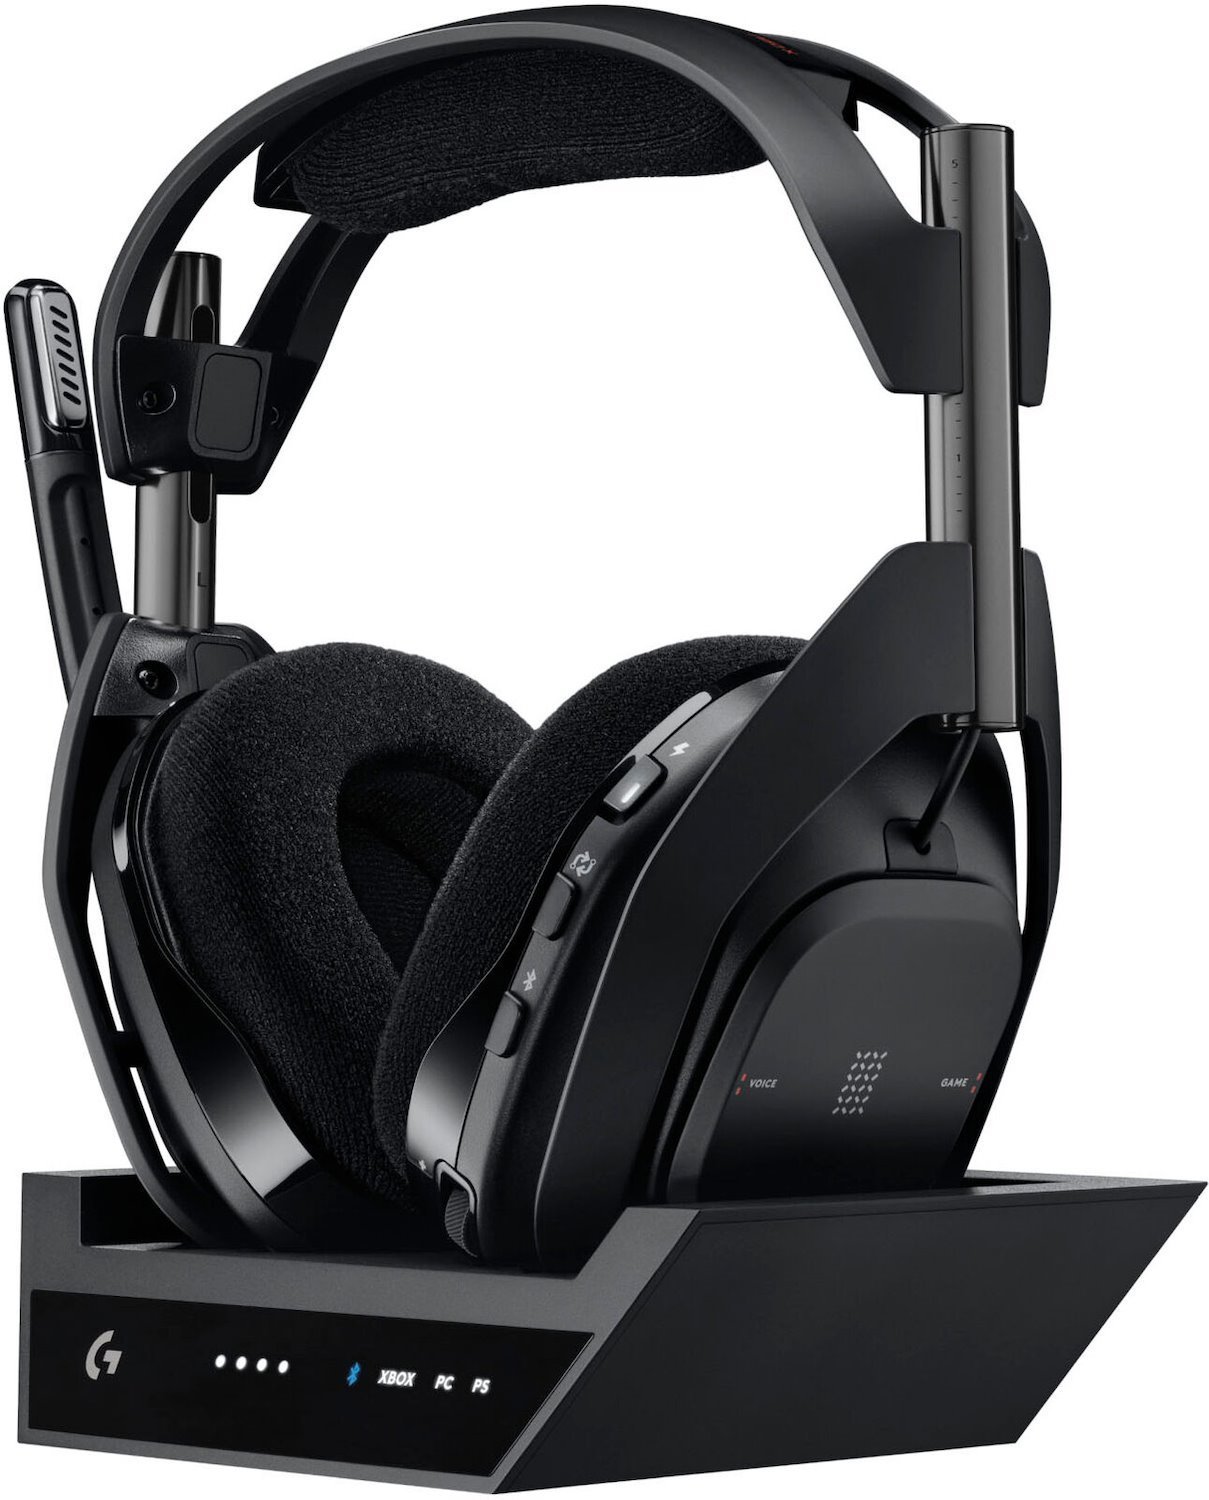 Astro A50 X Wireless Over-the-head Stereo Gaming Headset - Black